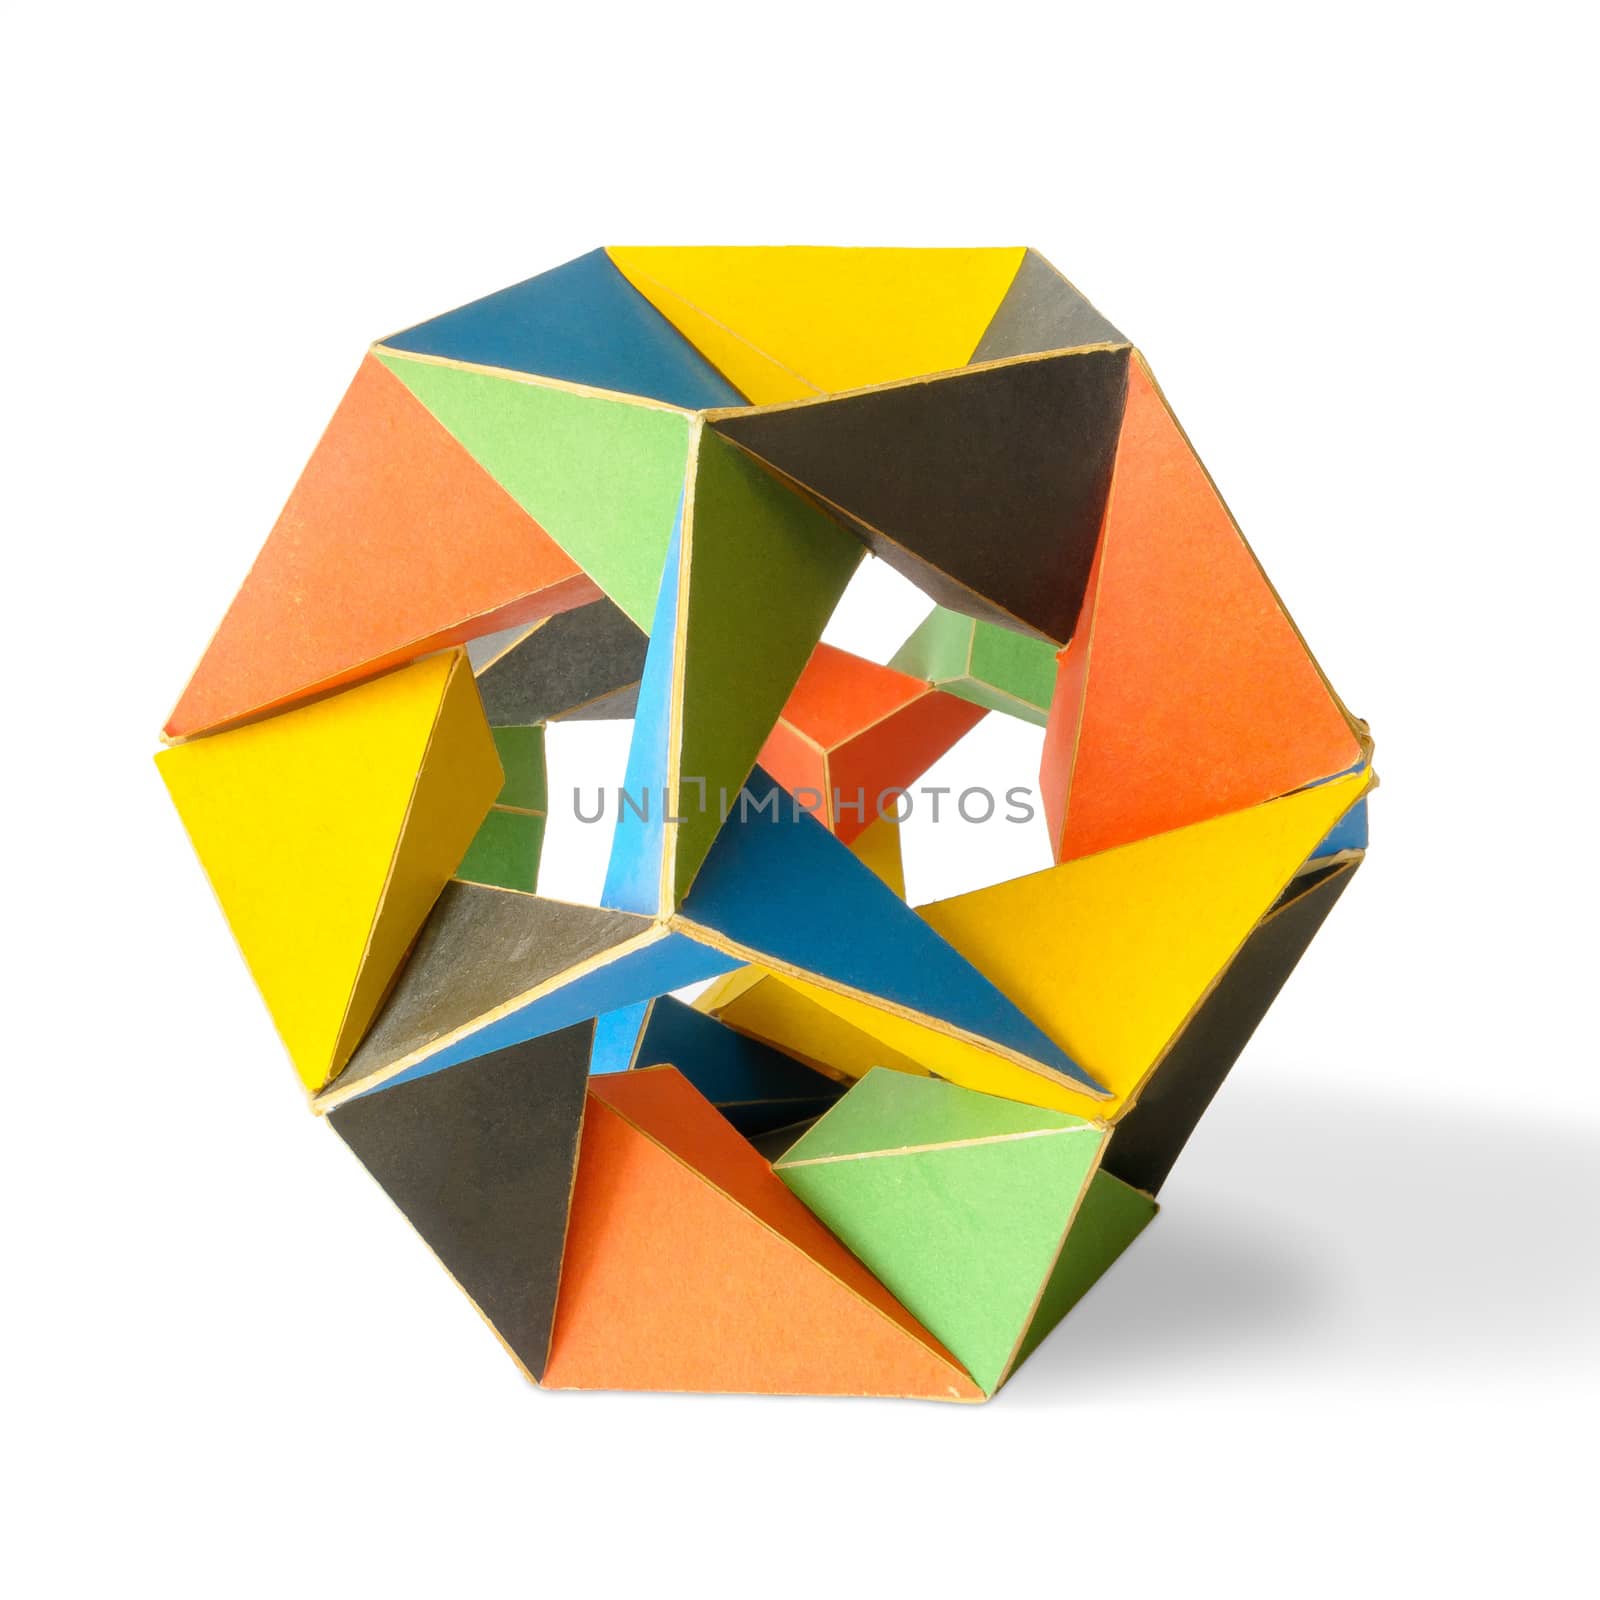 A colorful icosahedron on a white background